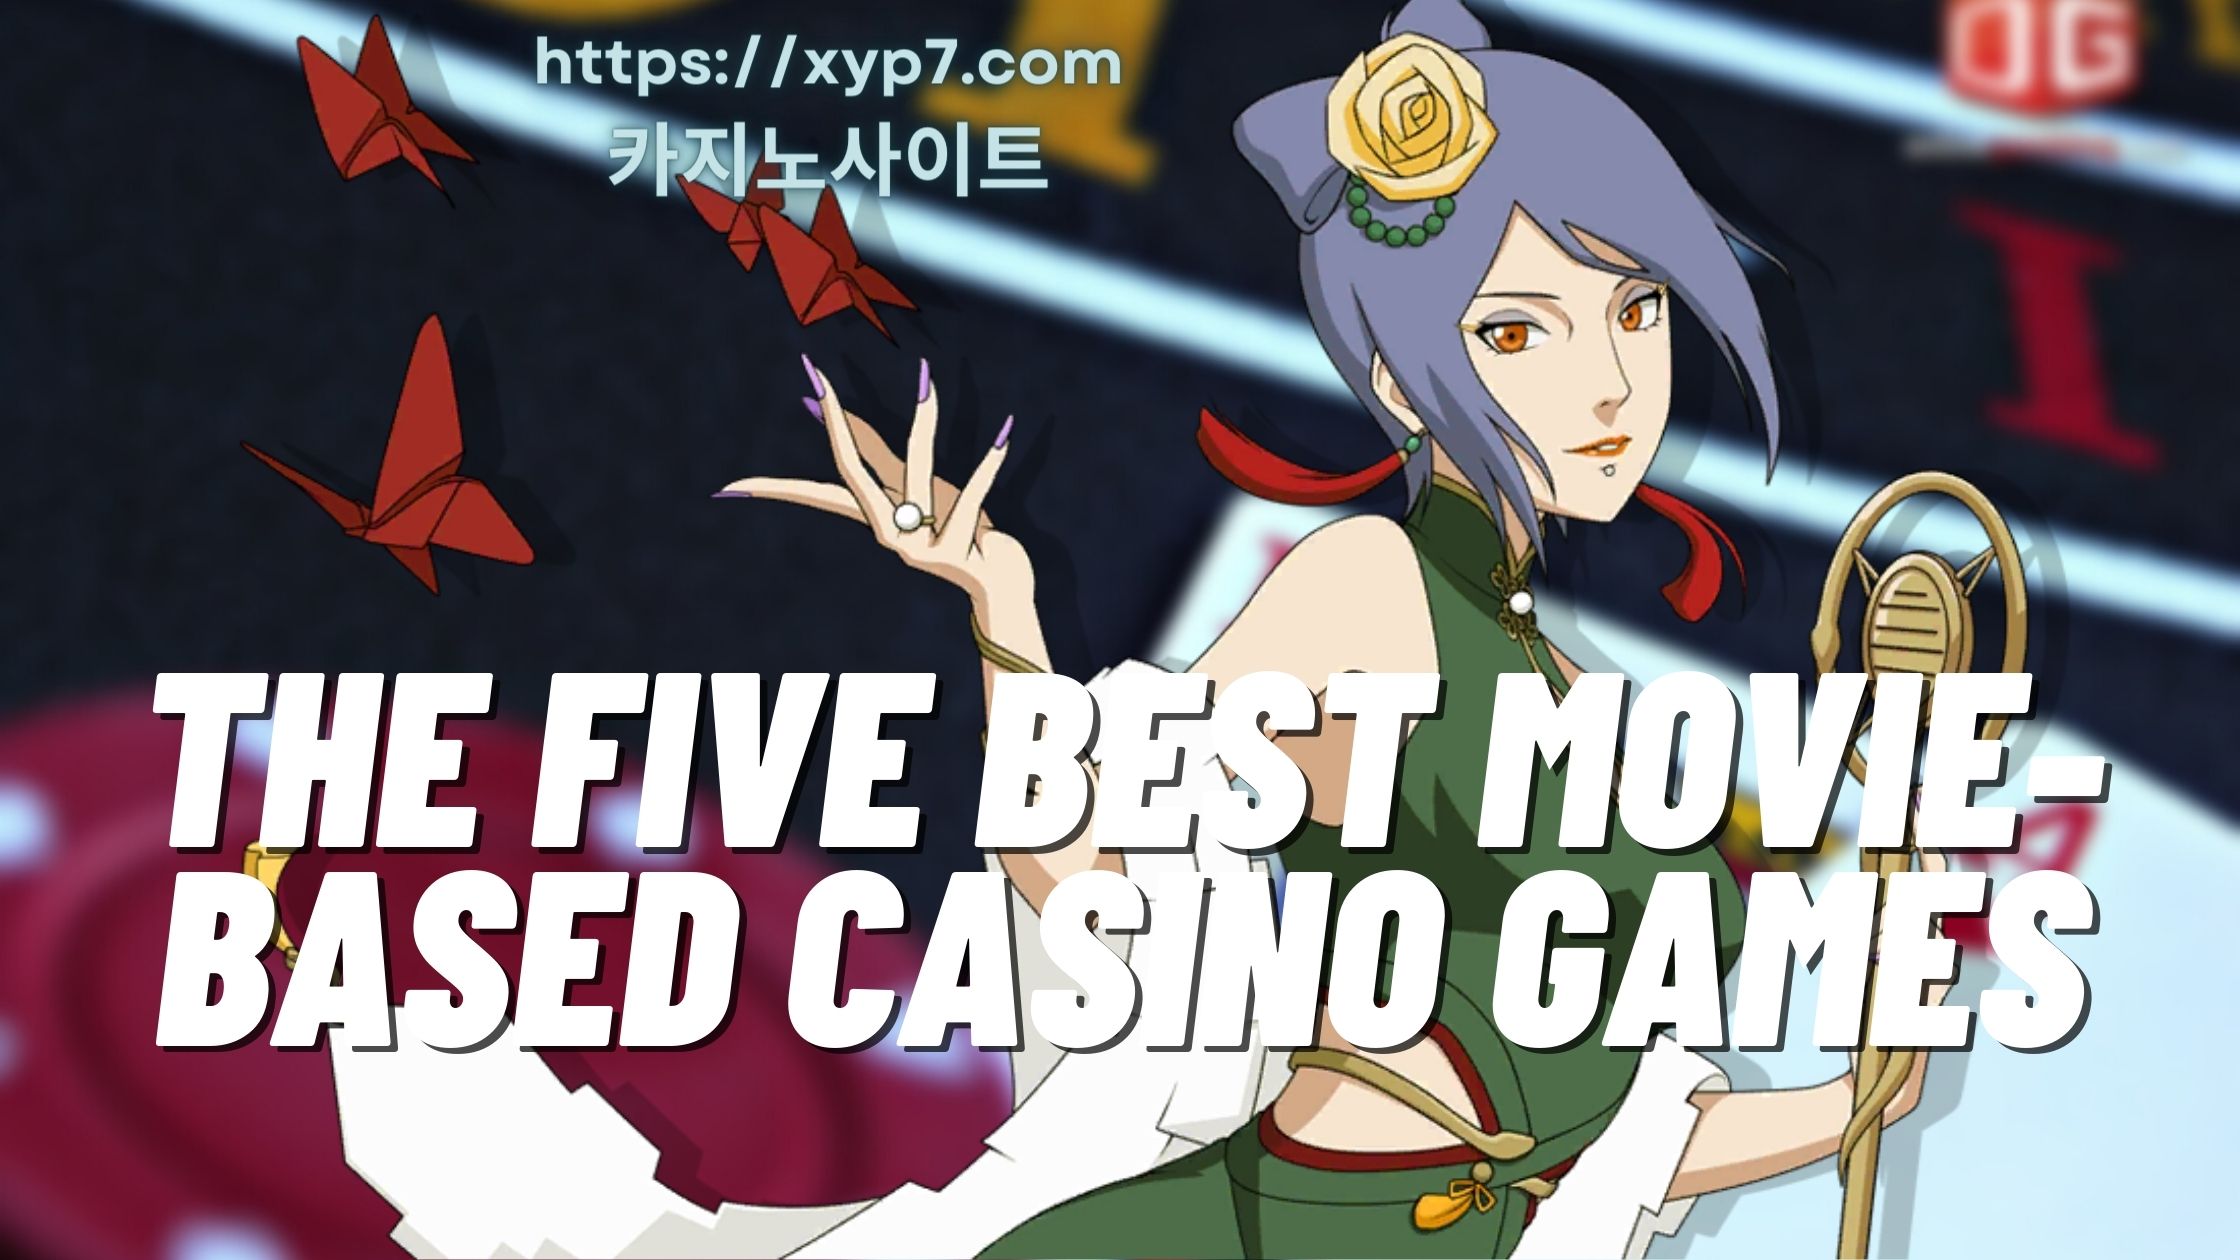 The Five Best Movie-based Casino Games